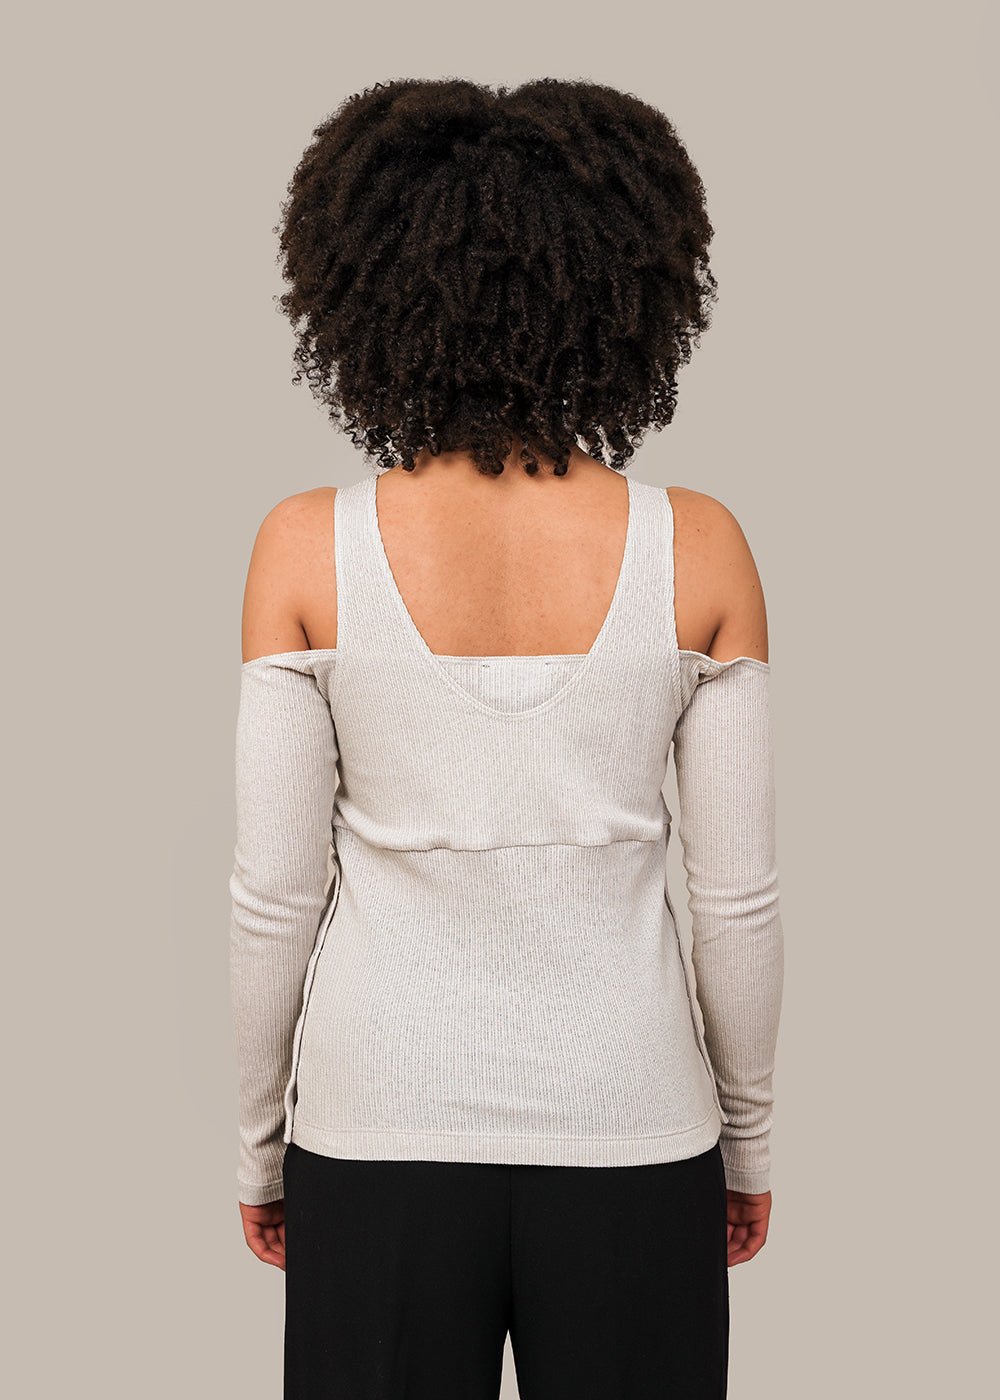 Permanent Vacation Silver Practice Layered Top - New Classics Studios Sustainable Ethical Fashion Canada